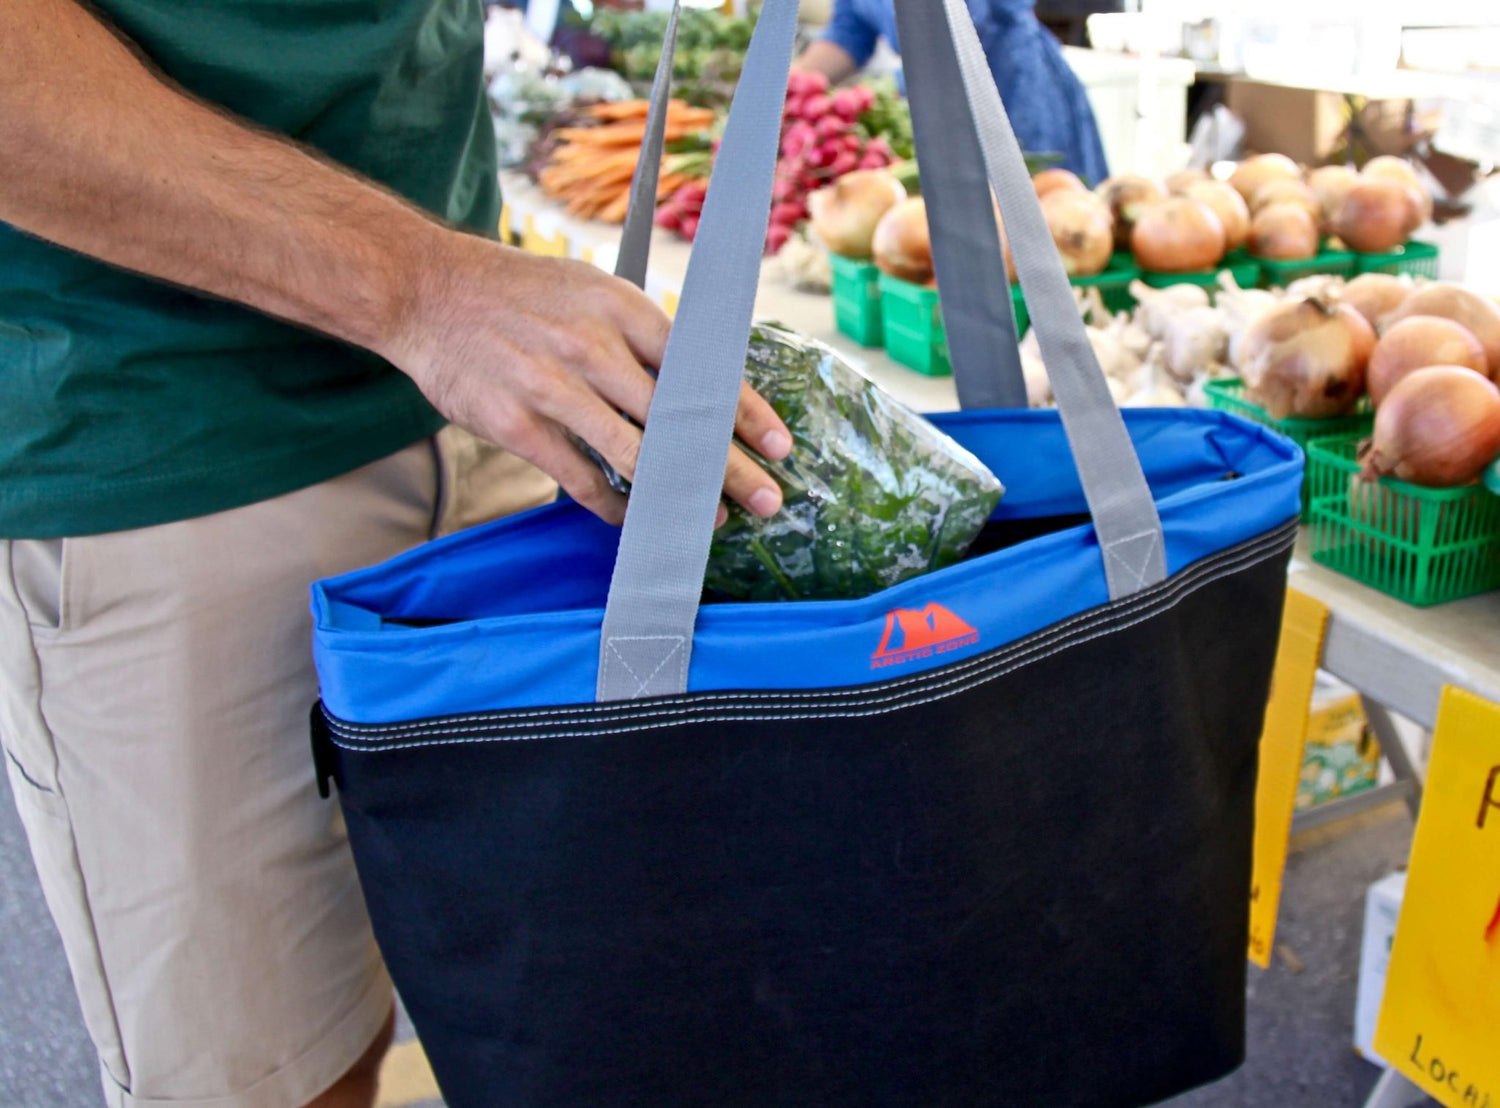 7 reasons to use a re-usable grocery bag